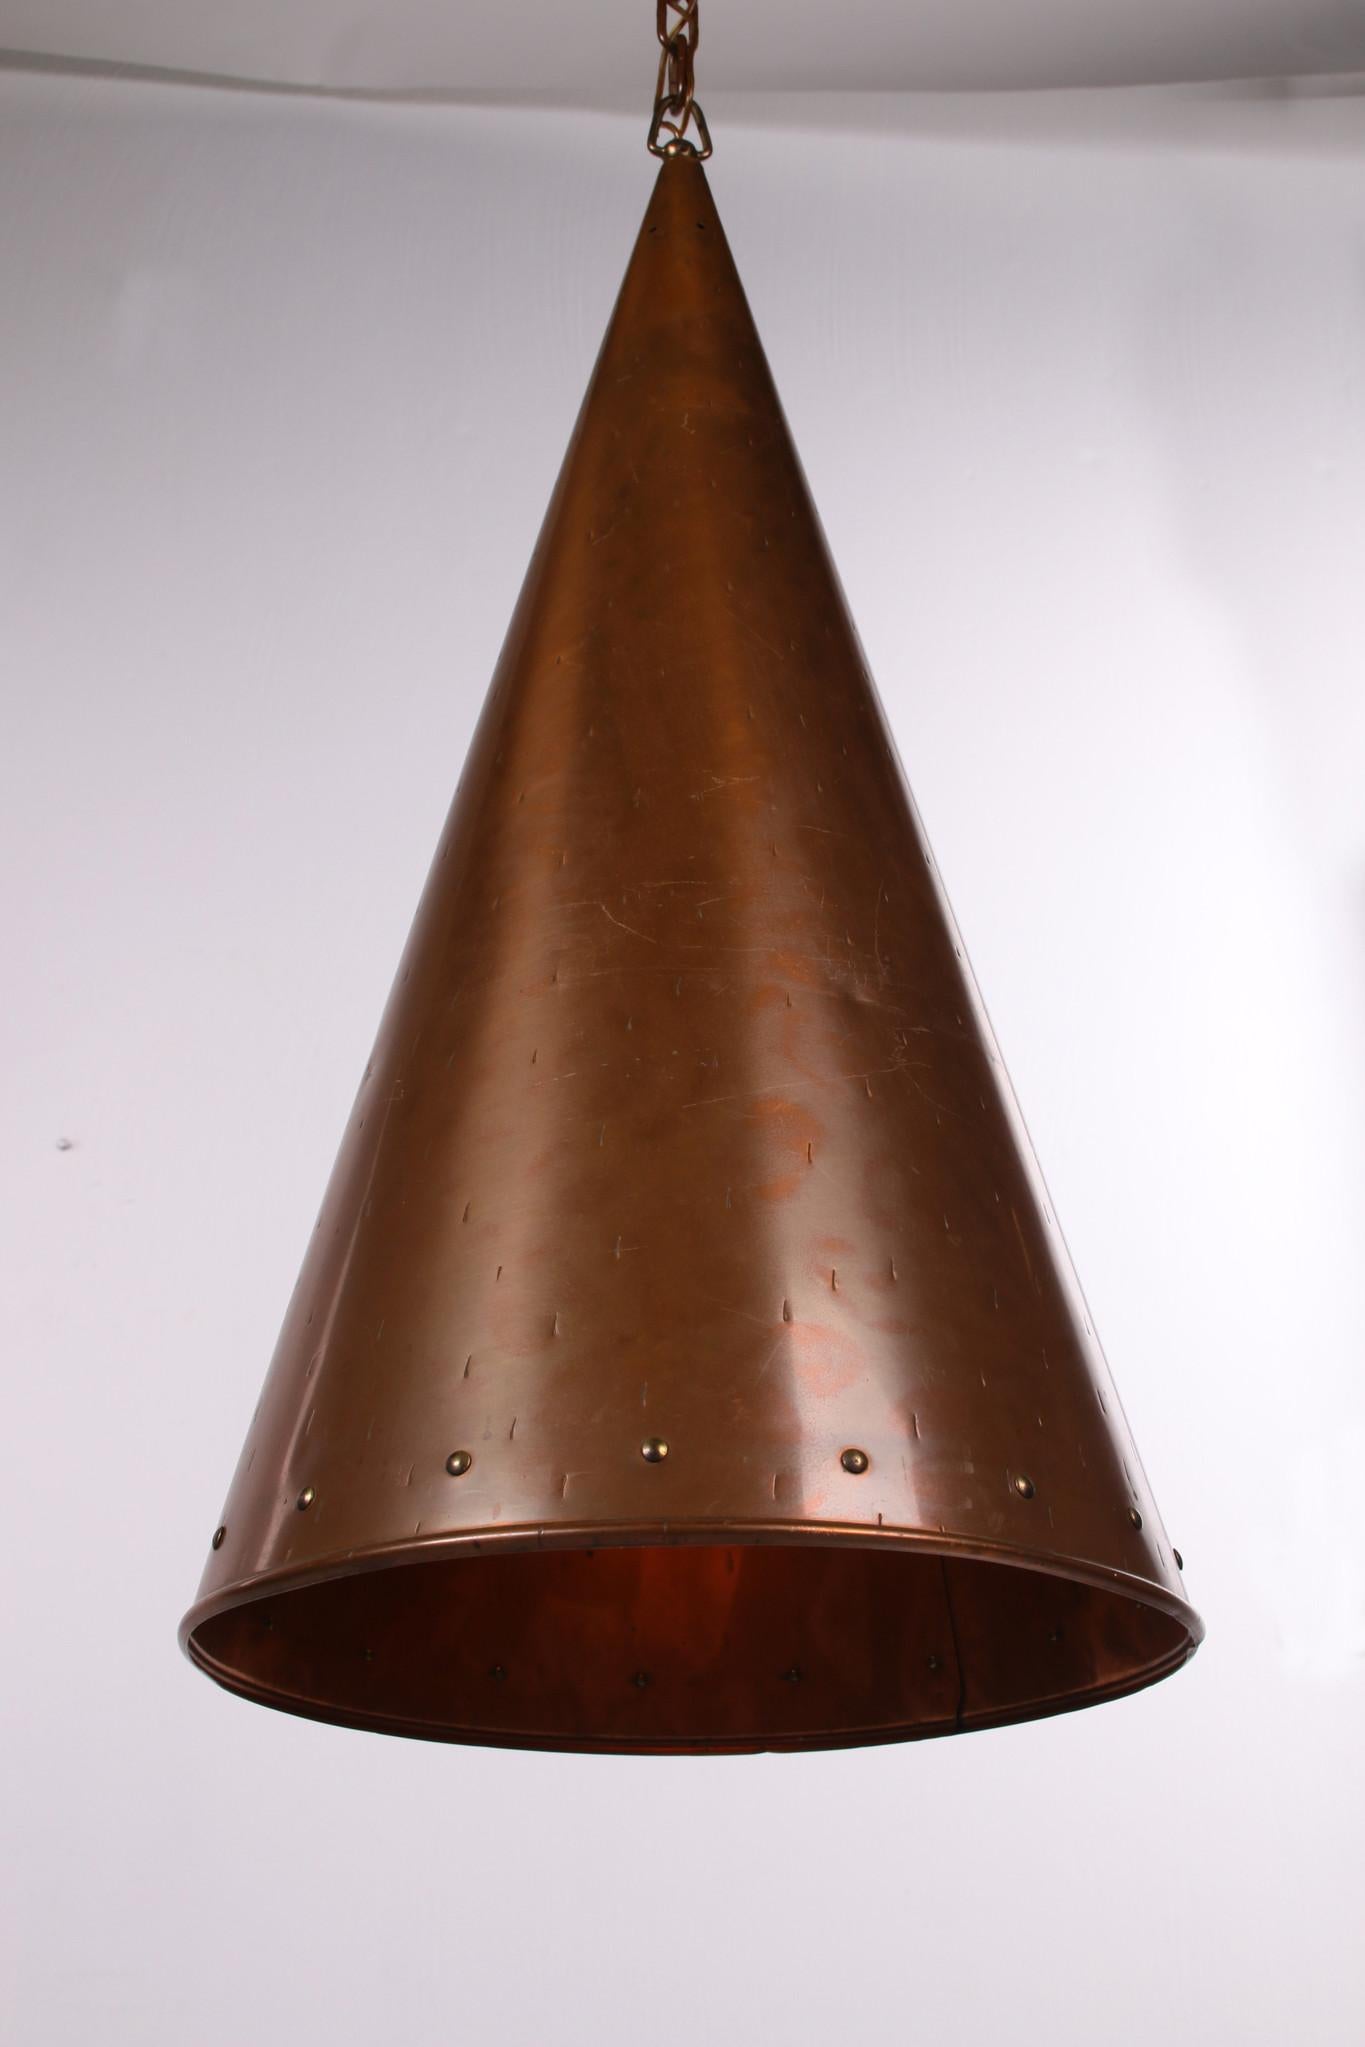 Danish Hand Hammered Copper Pendant Lamp from E.S Horn Aalestrup, 50s For Sale 7